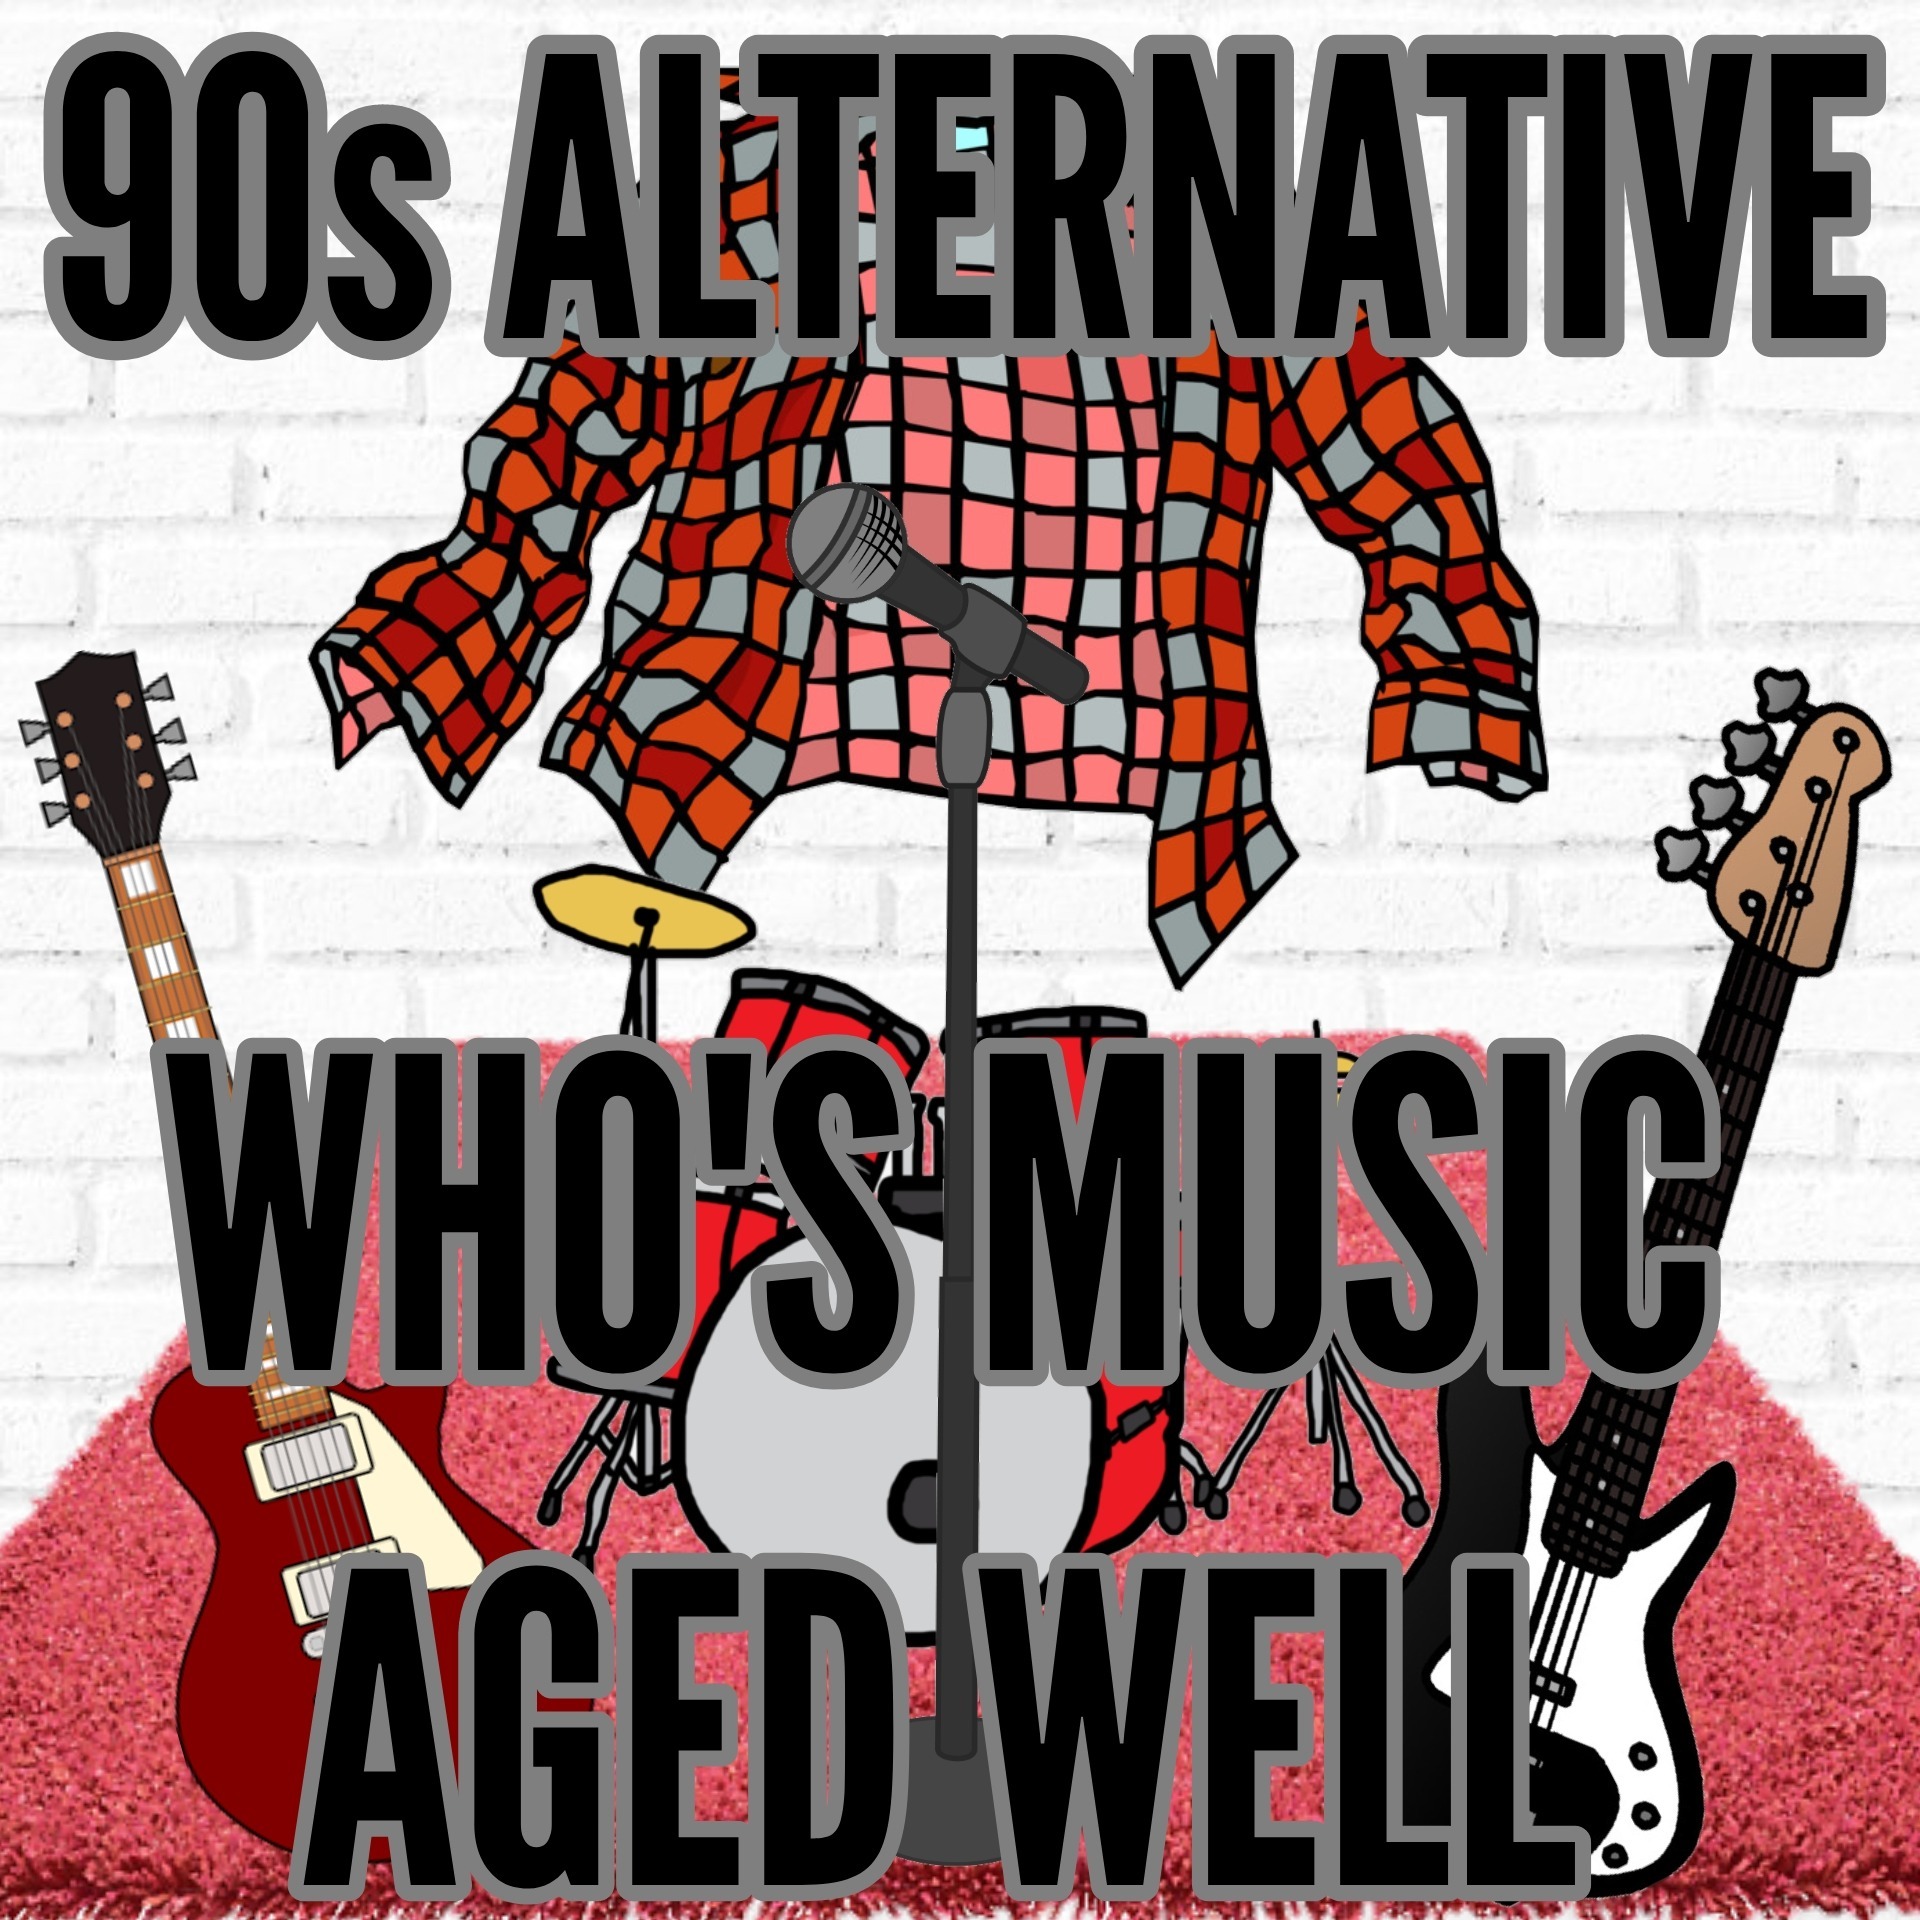 90s Alternative Rock - Which Bands Music Aged Well? Who’s Did NOT?